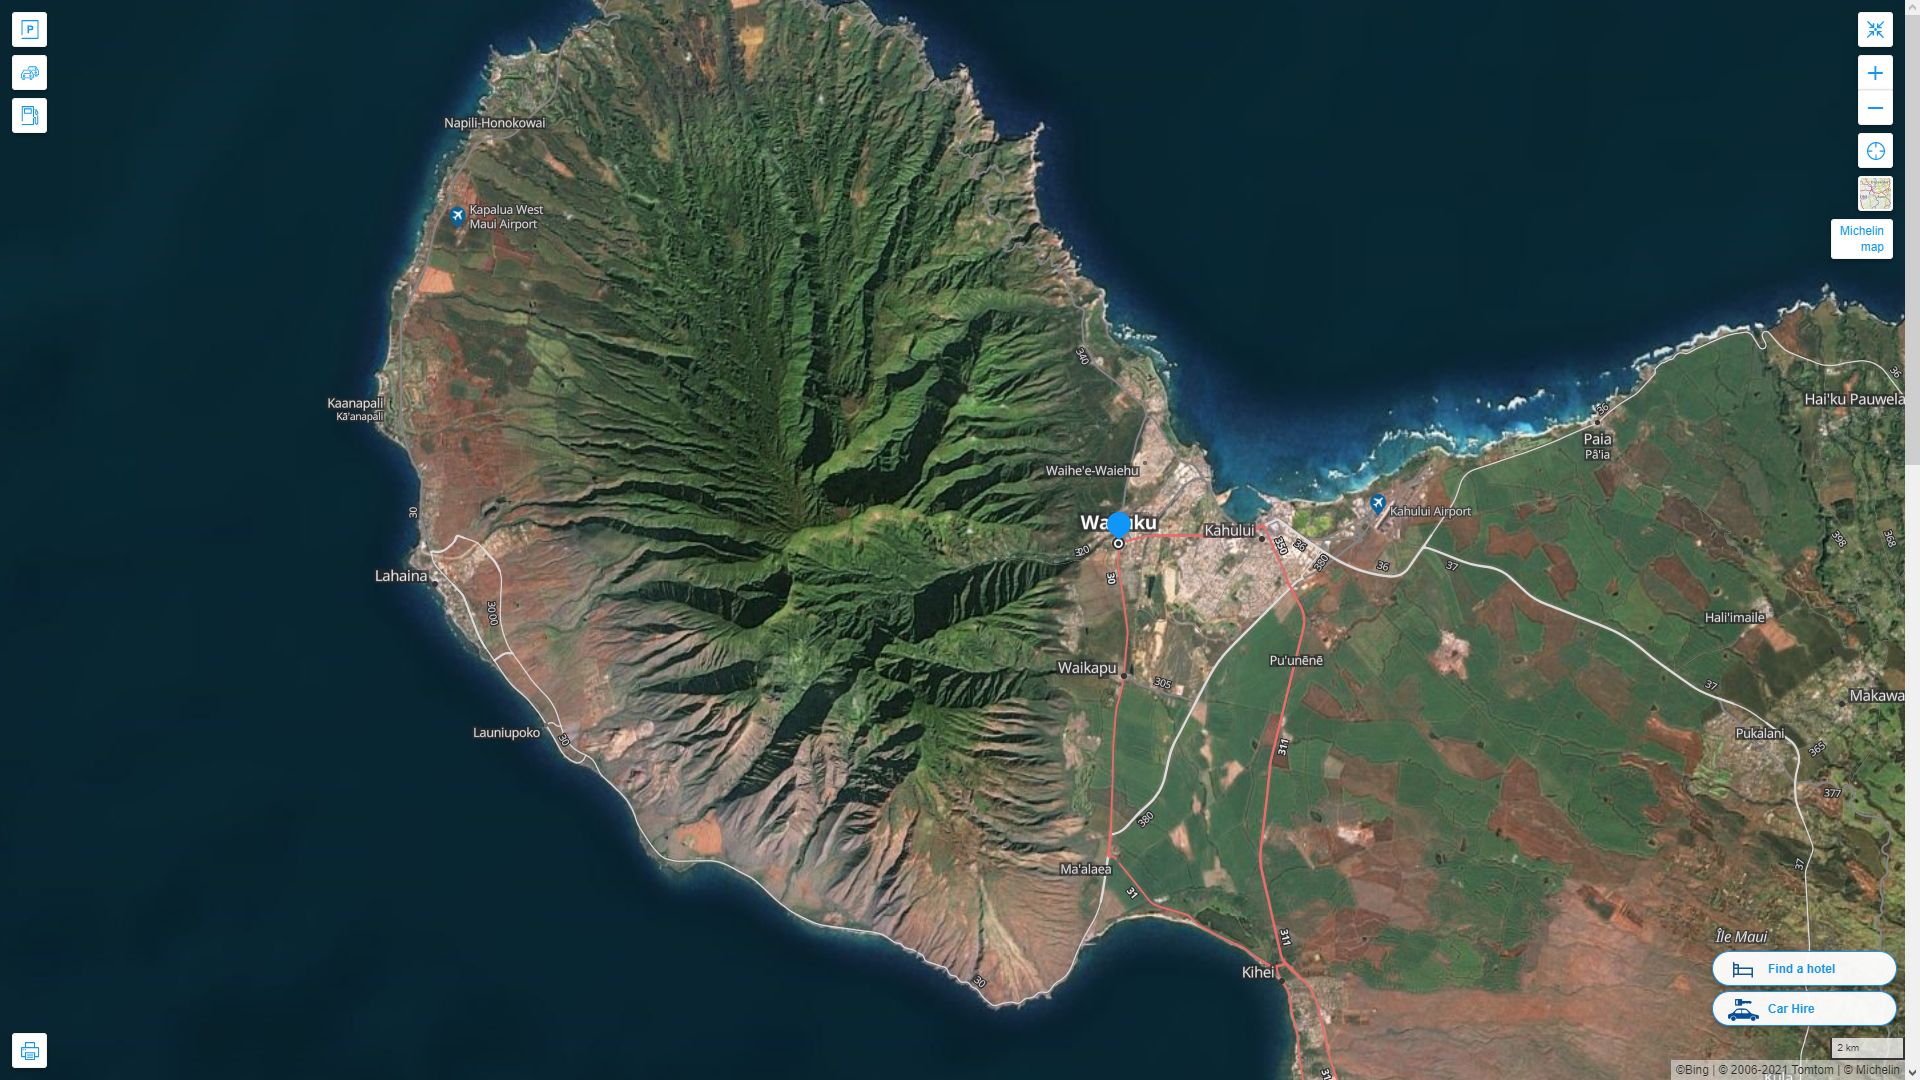 Wailuku Hawaii Highway and Road Map with Satellite View